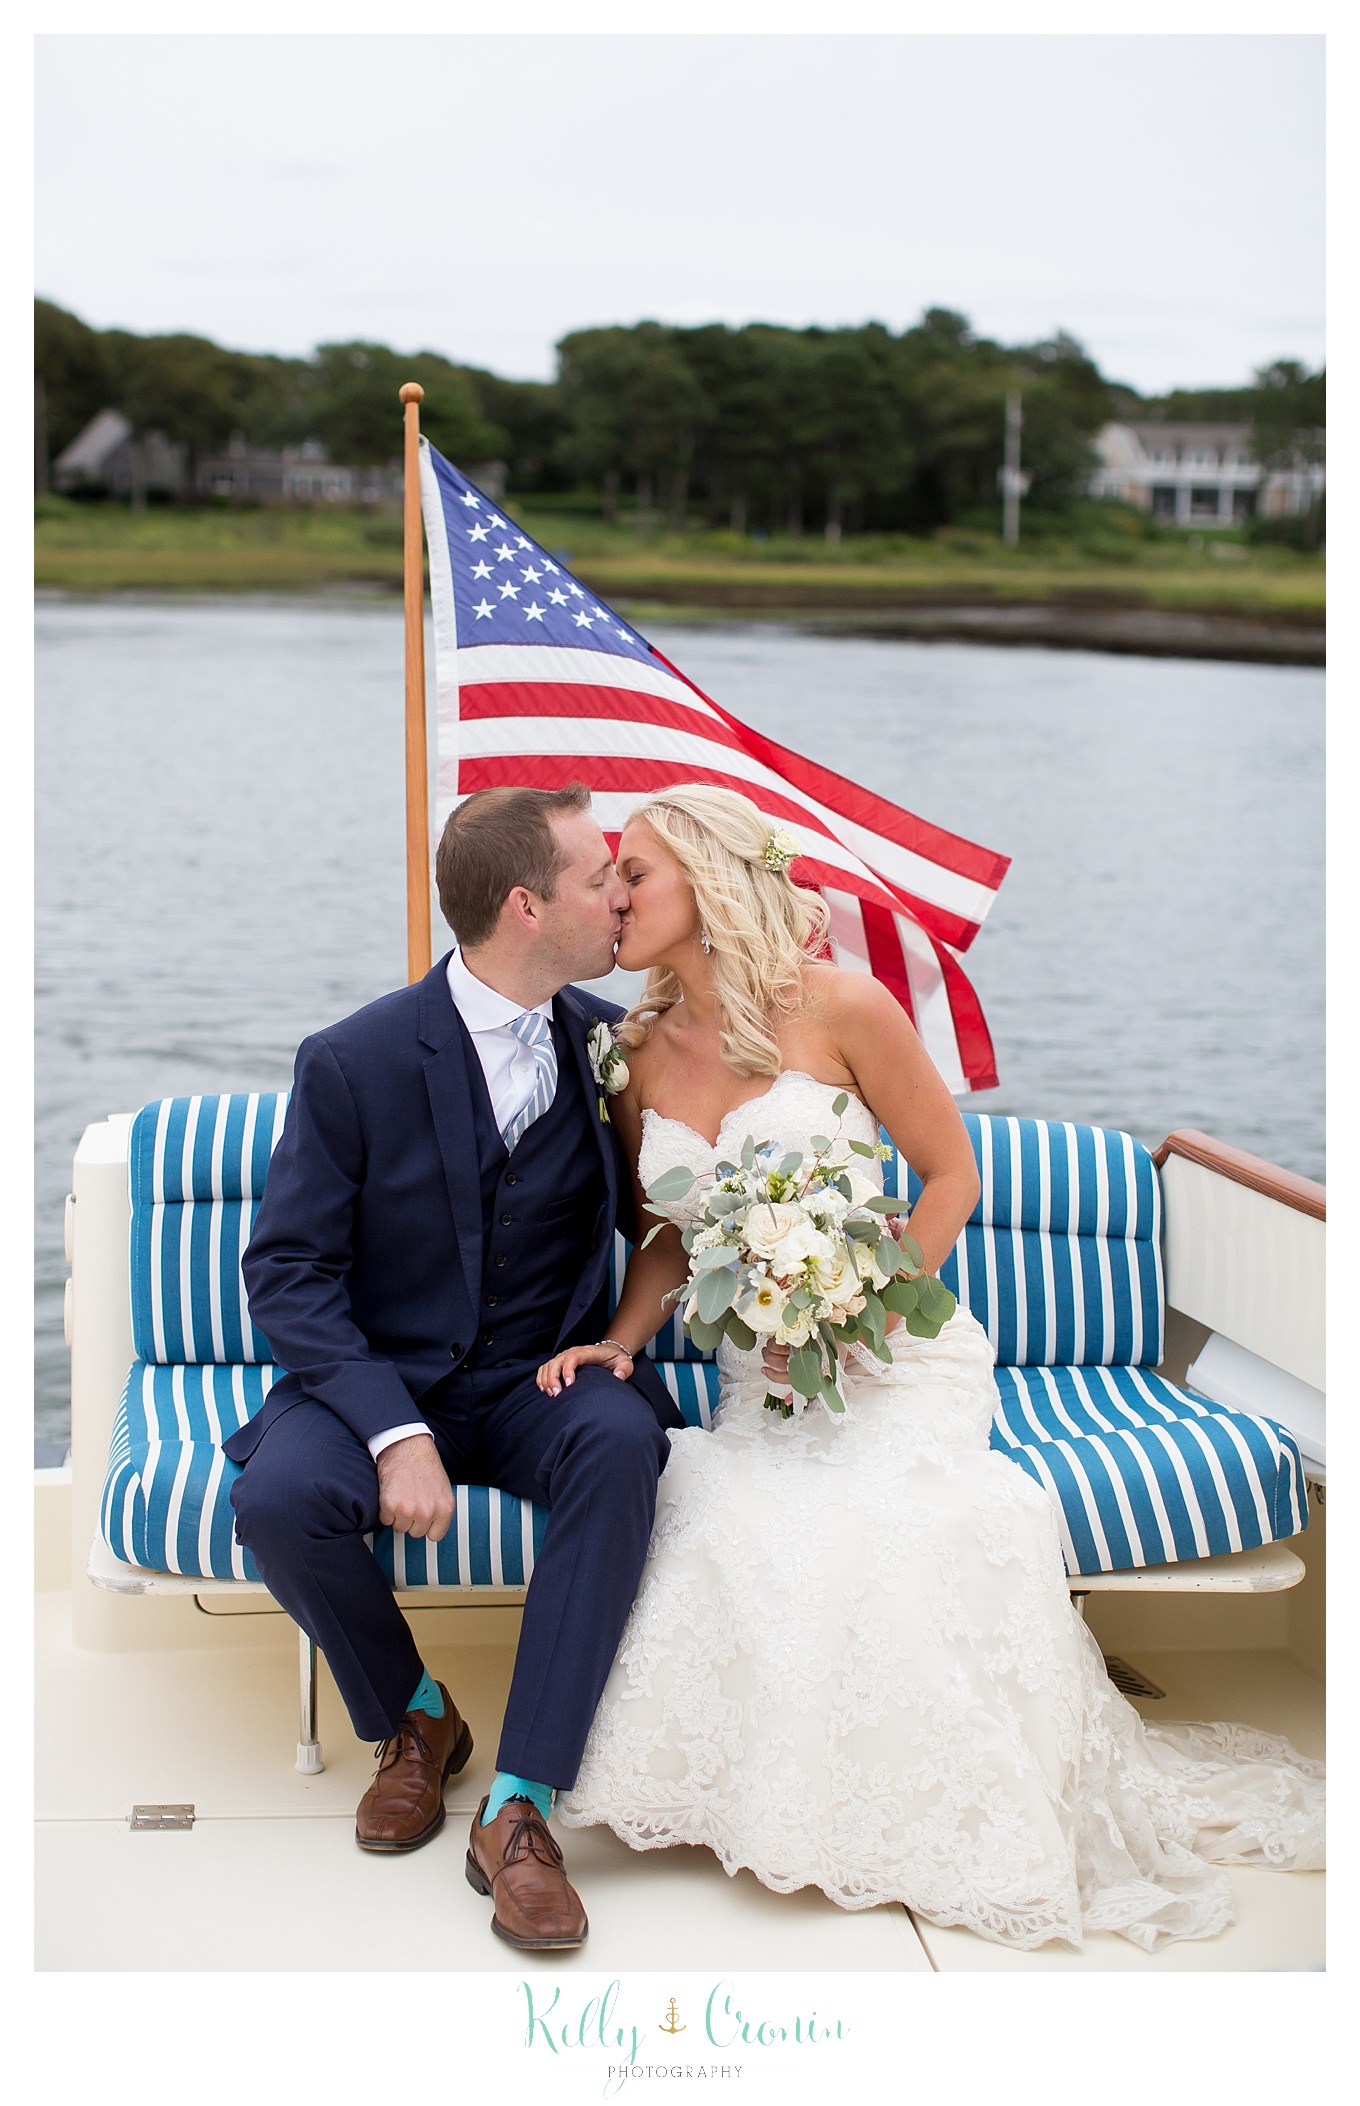 A bride and groom kiss on a boat.